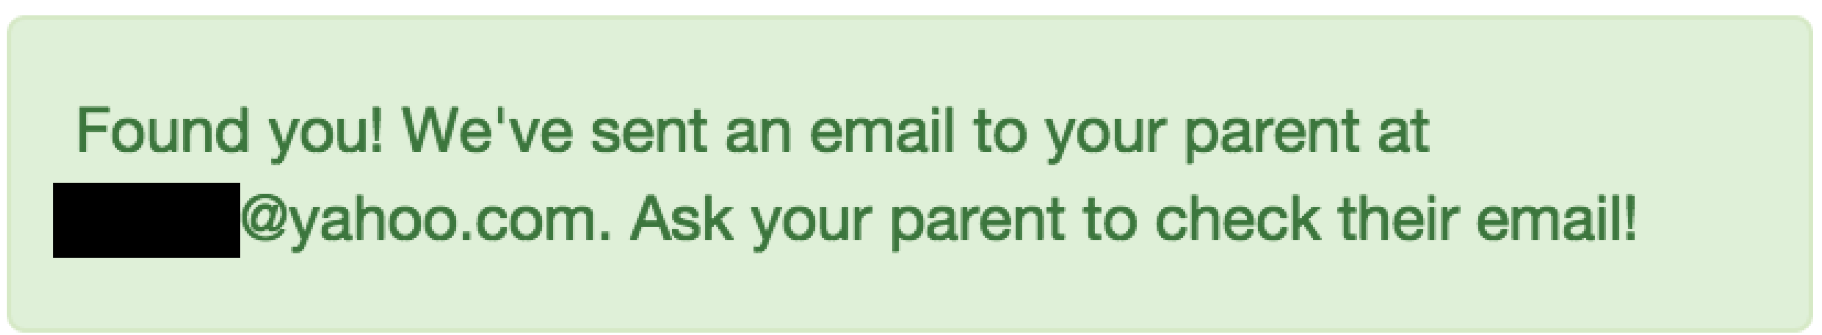 Parent contact information needlessly leaked via a password recovery request